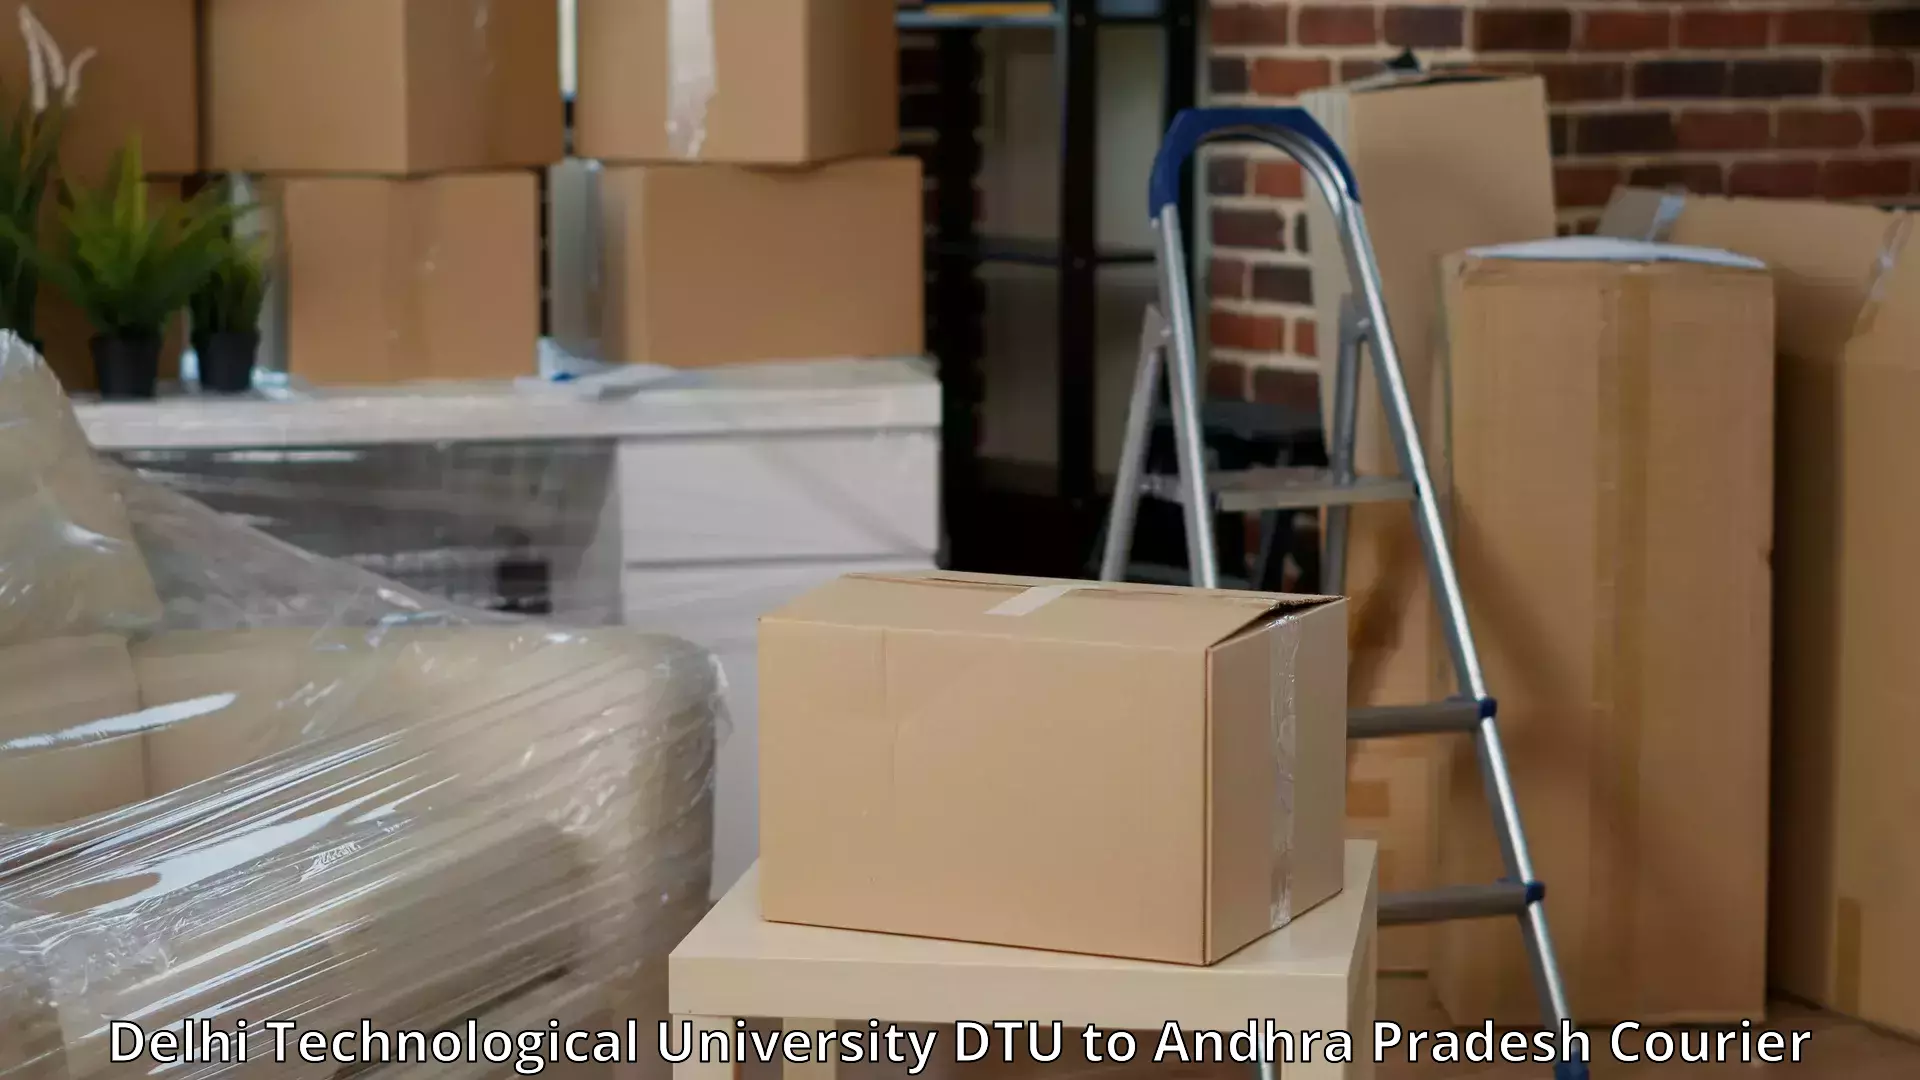 Moving and packing experts in Delhi Technological University DTU to Gollaprollu